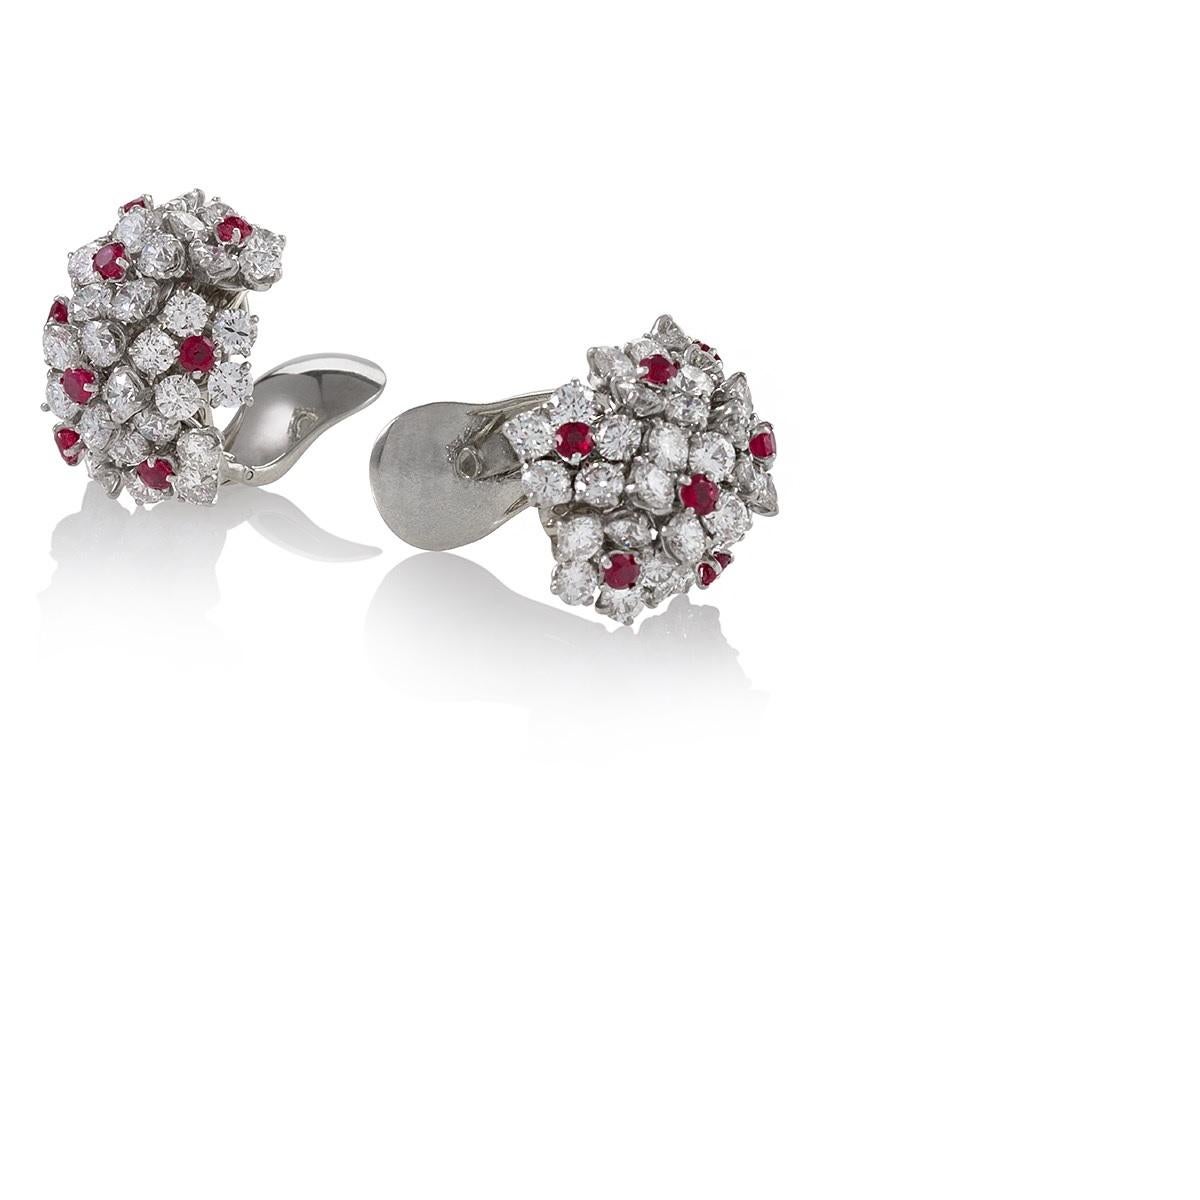 A pair of ruby and diamond cluster earrings by Van Cleef and Arpels. Set in platinum, the earrings feature clusters of round brilliant-cut diamonds with an approximate total weight of 12 carats, interspersed with 16 beautifully matched round rubies.